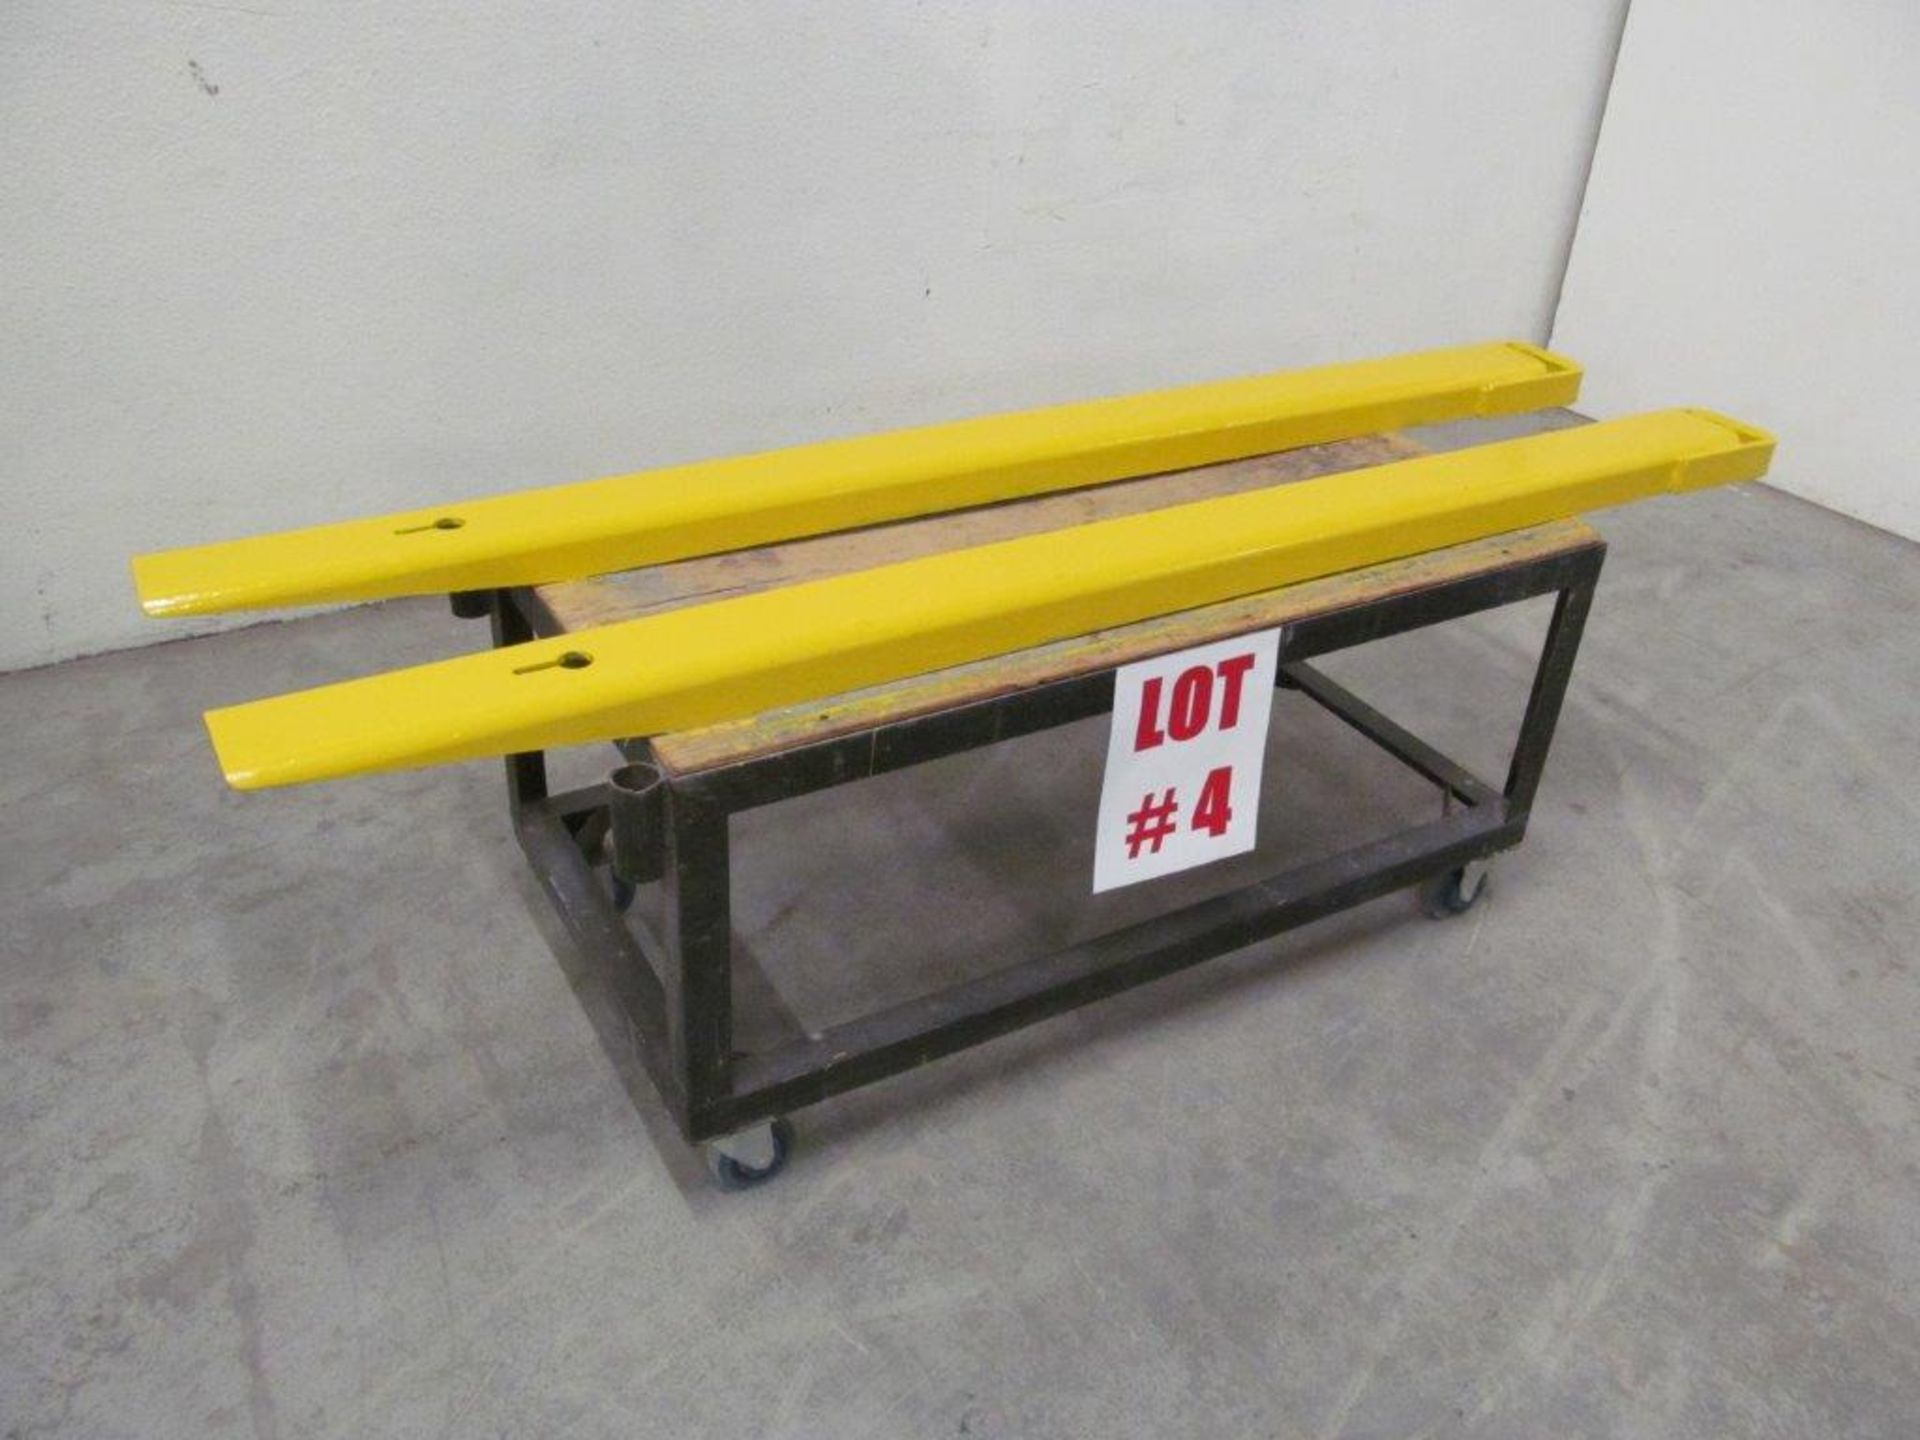 FORK EXTENSIONS FOR LOT # 3, 5'' WIDE, 74'' LONG, 2 3/4'' THICK, C/W ROLL AROUND CART